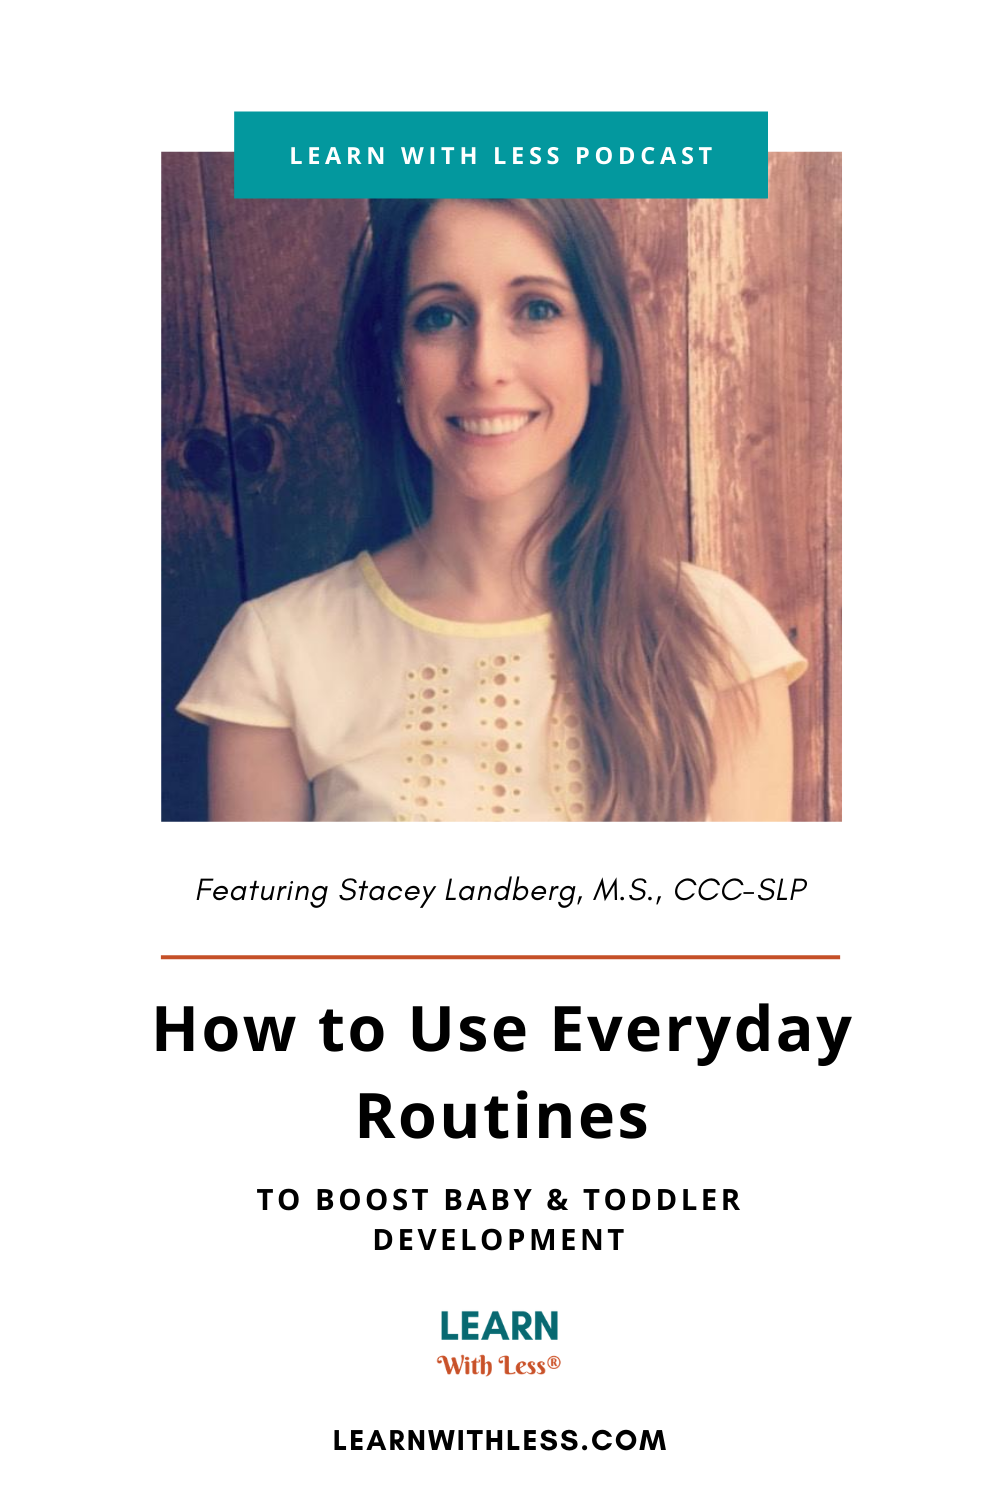 How to Use Everyday Routines to Boost Baby and Toddler Development, with Stacey Landberg